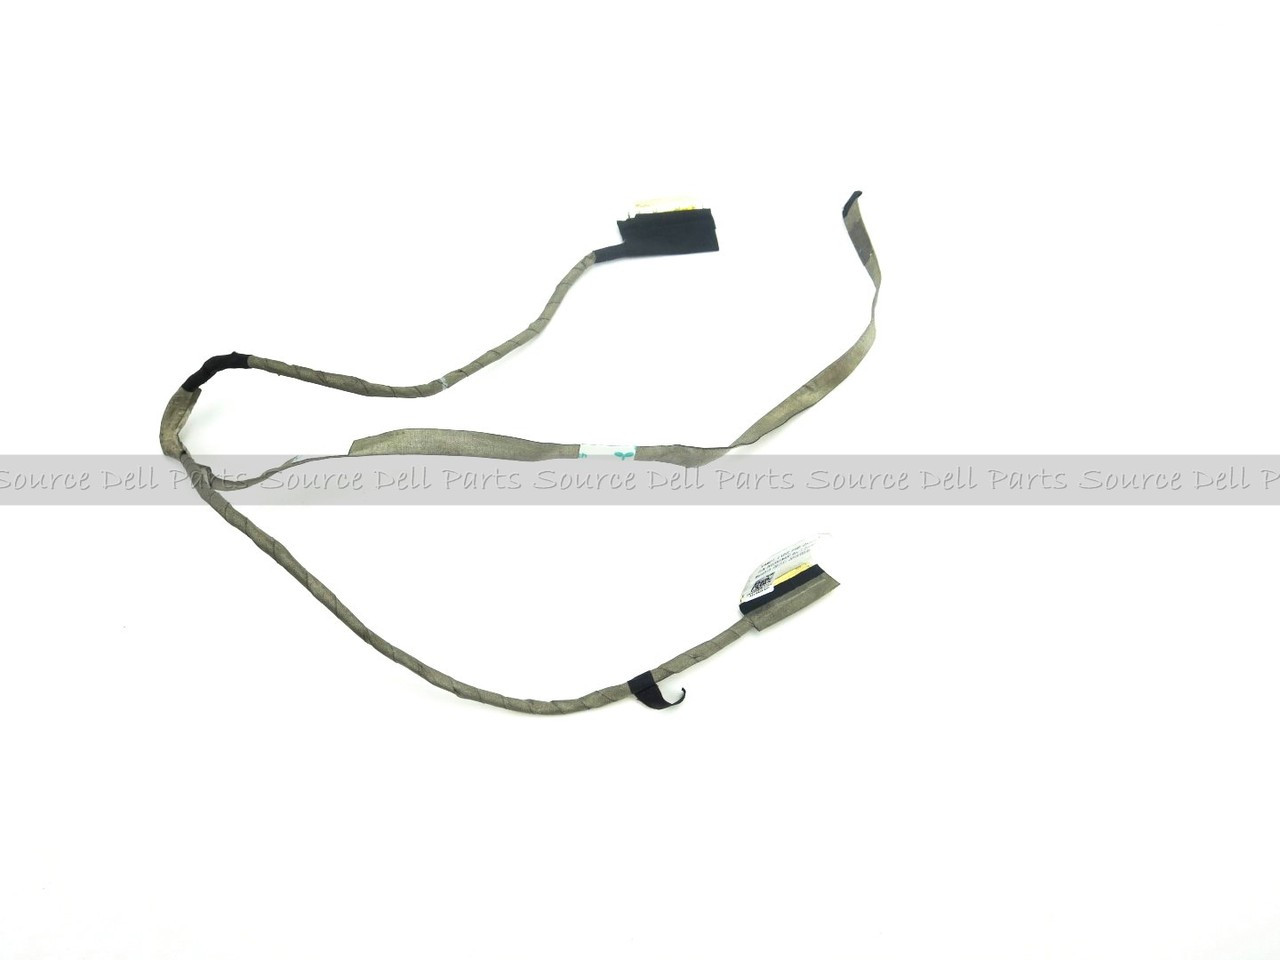 Dell Inspiron 15 5521 FHD (1920 x 1080) Ribbon LCD Video Cable - W08FN